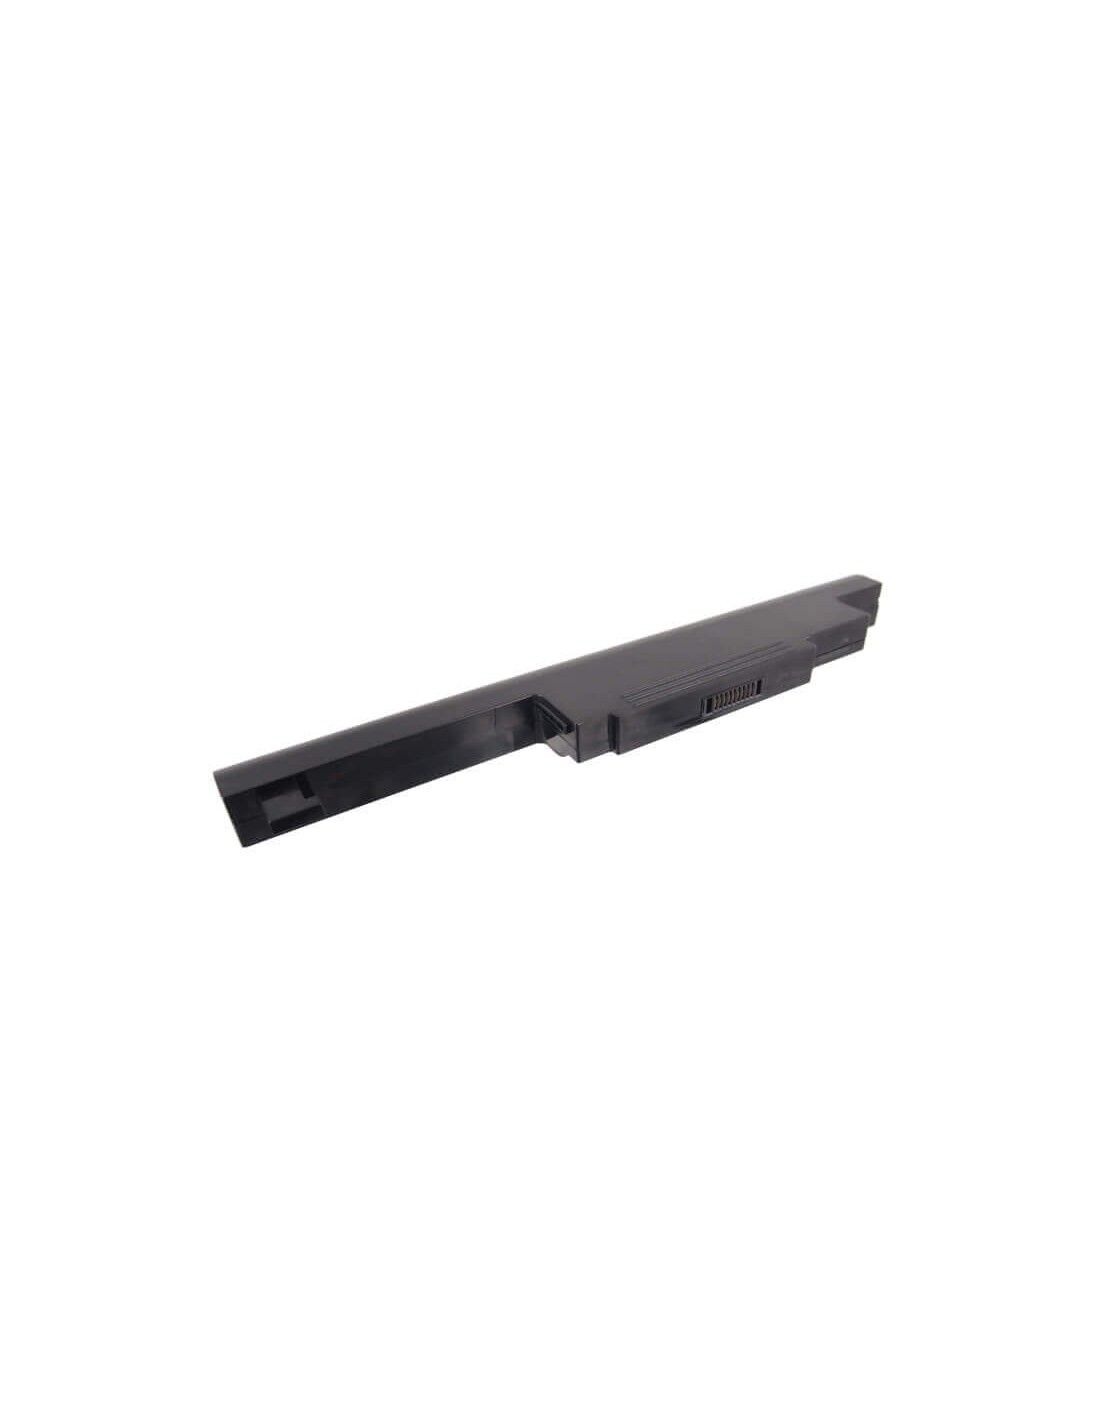 Black Battery for Hasee A300, A350, A450 11.1V, 4400mAh - 48.84Wh